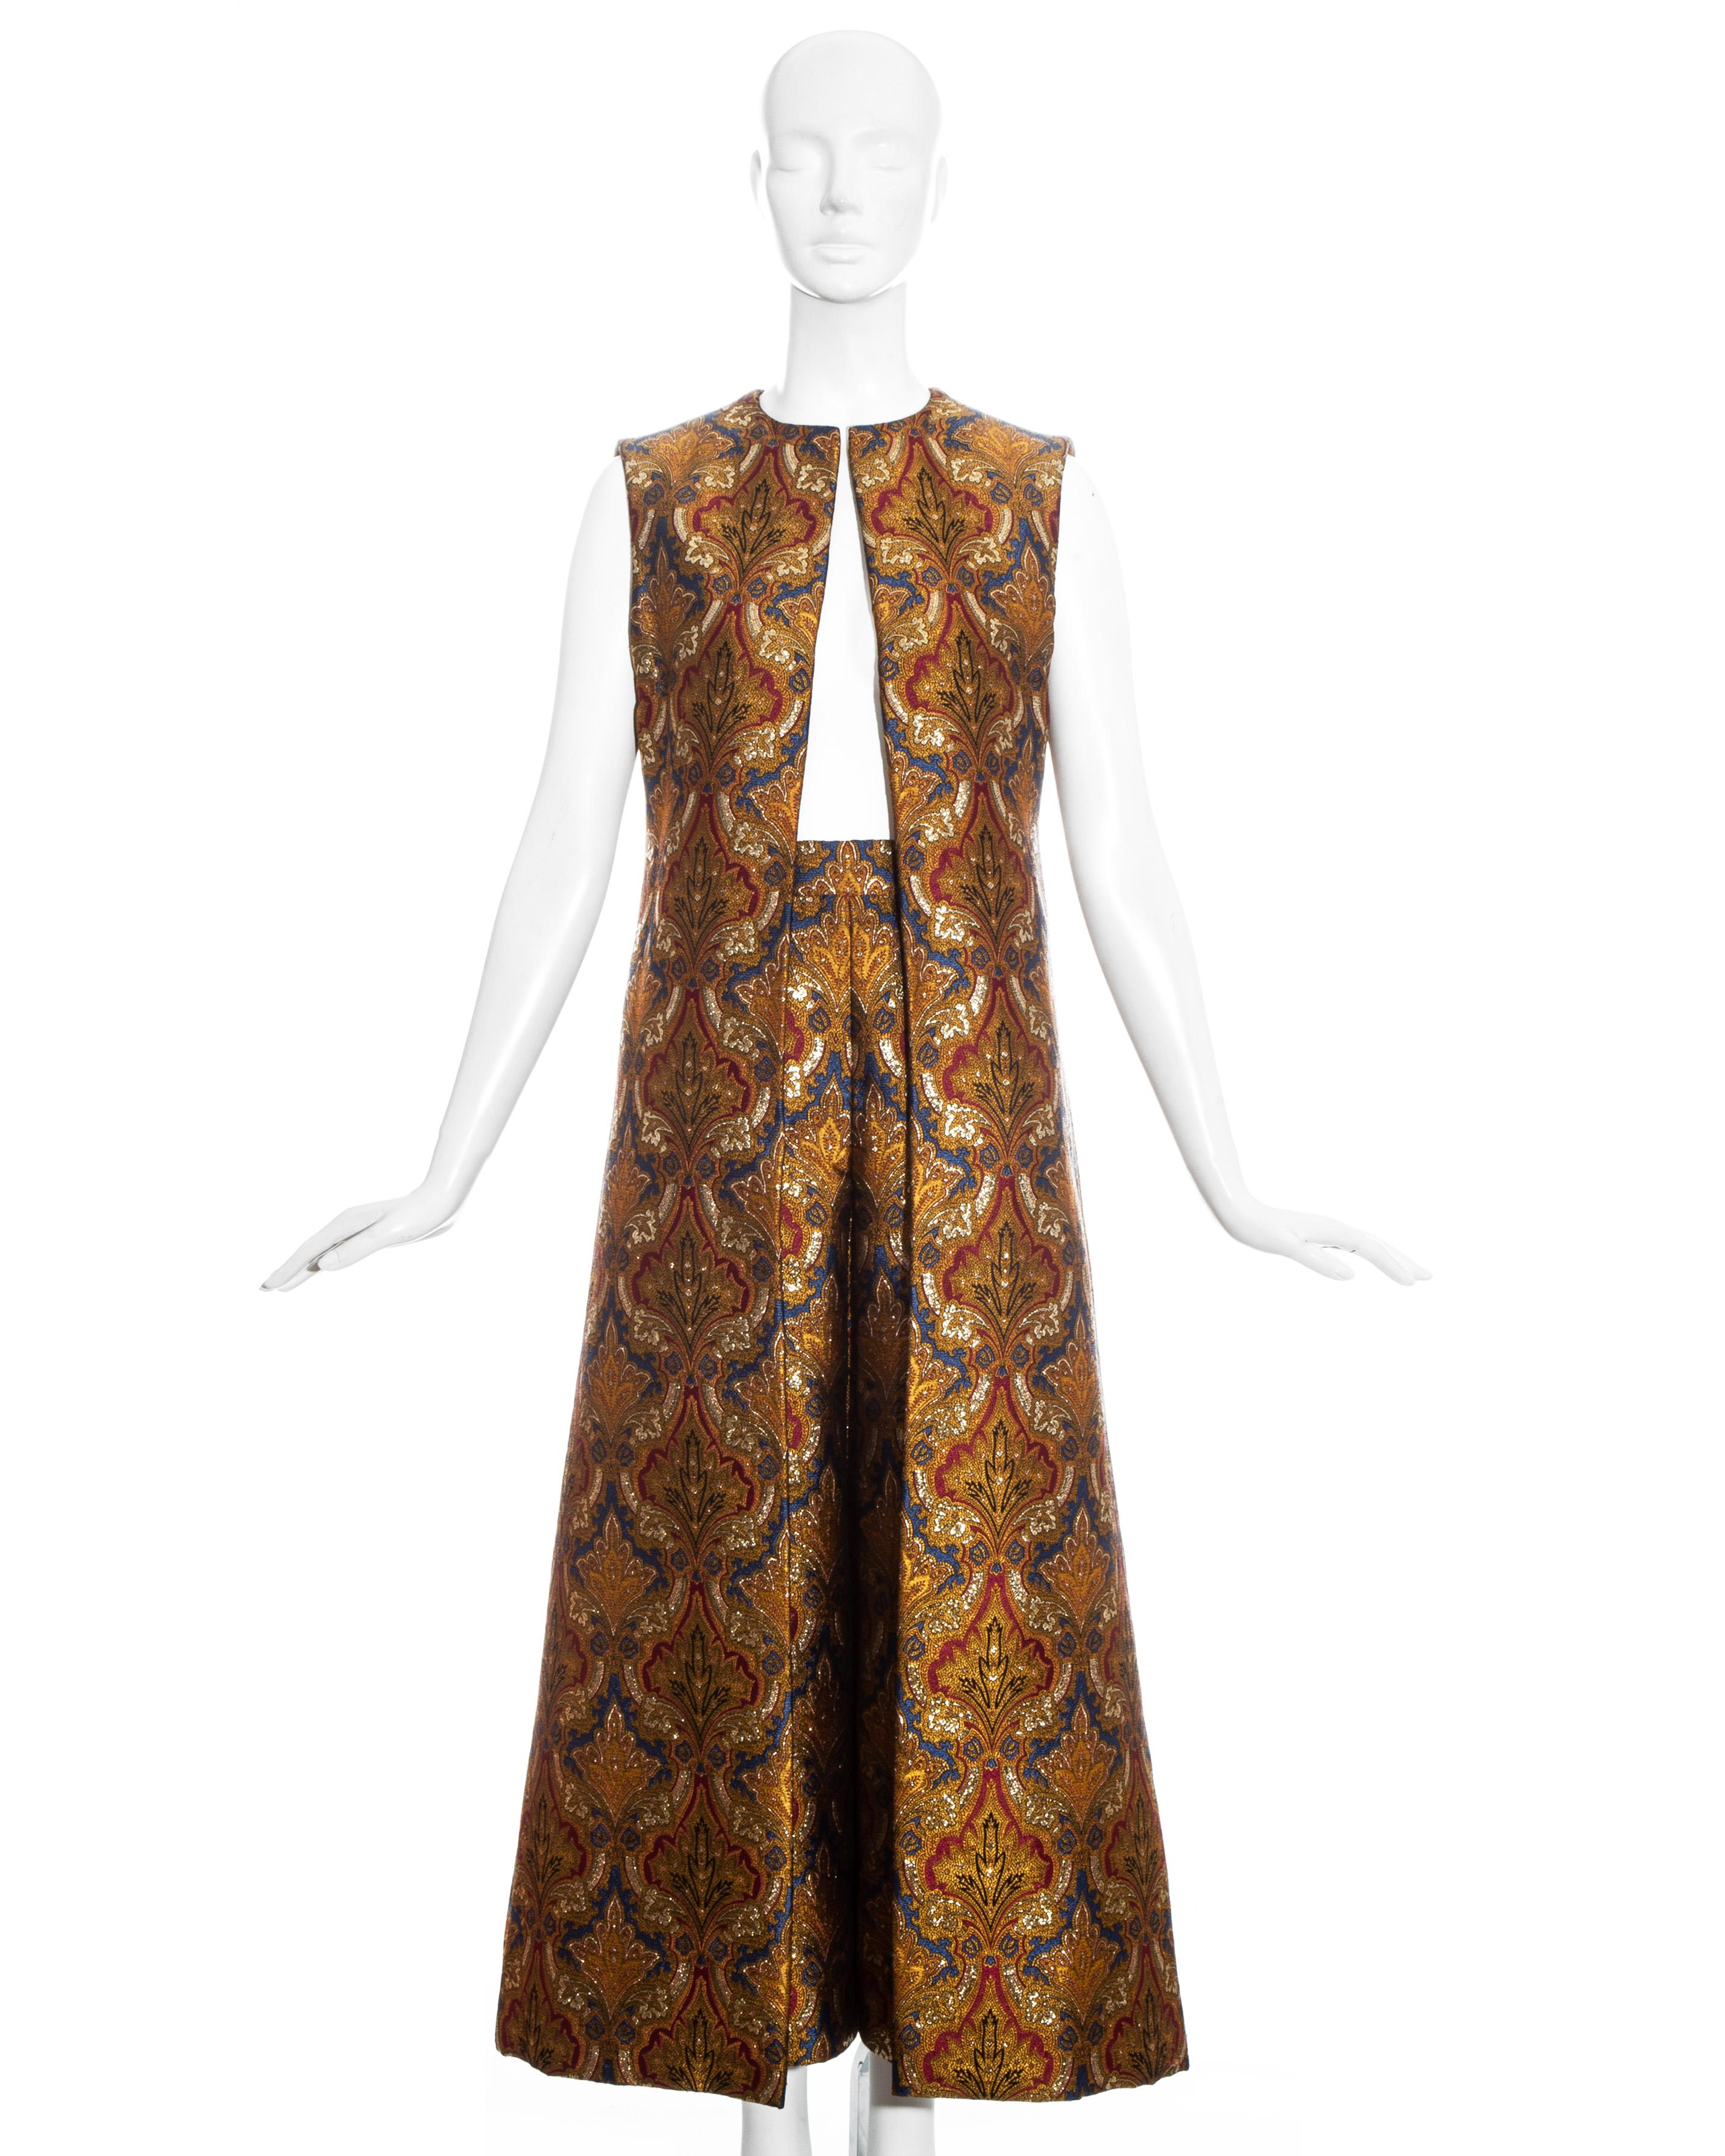 Paul Daunay gold lamé jacquard couture evening ensemble comprising: long-line waistcoat lined with purple silk and high rise a-line skirt with inverted pleats and two side pockets.

Paul Daunay designs were hand made to a Haute Couture standard in